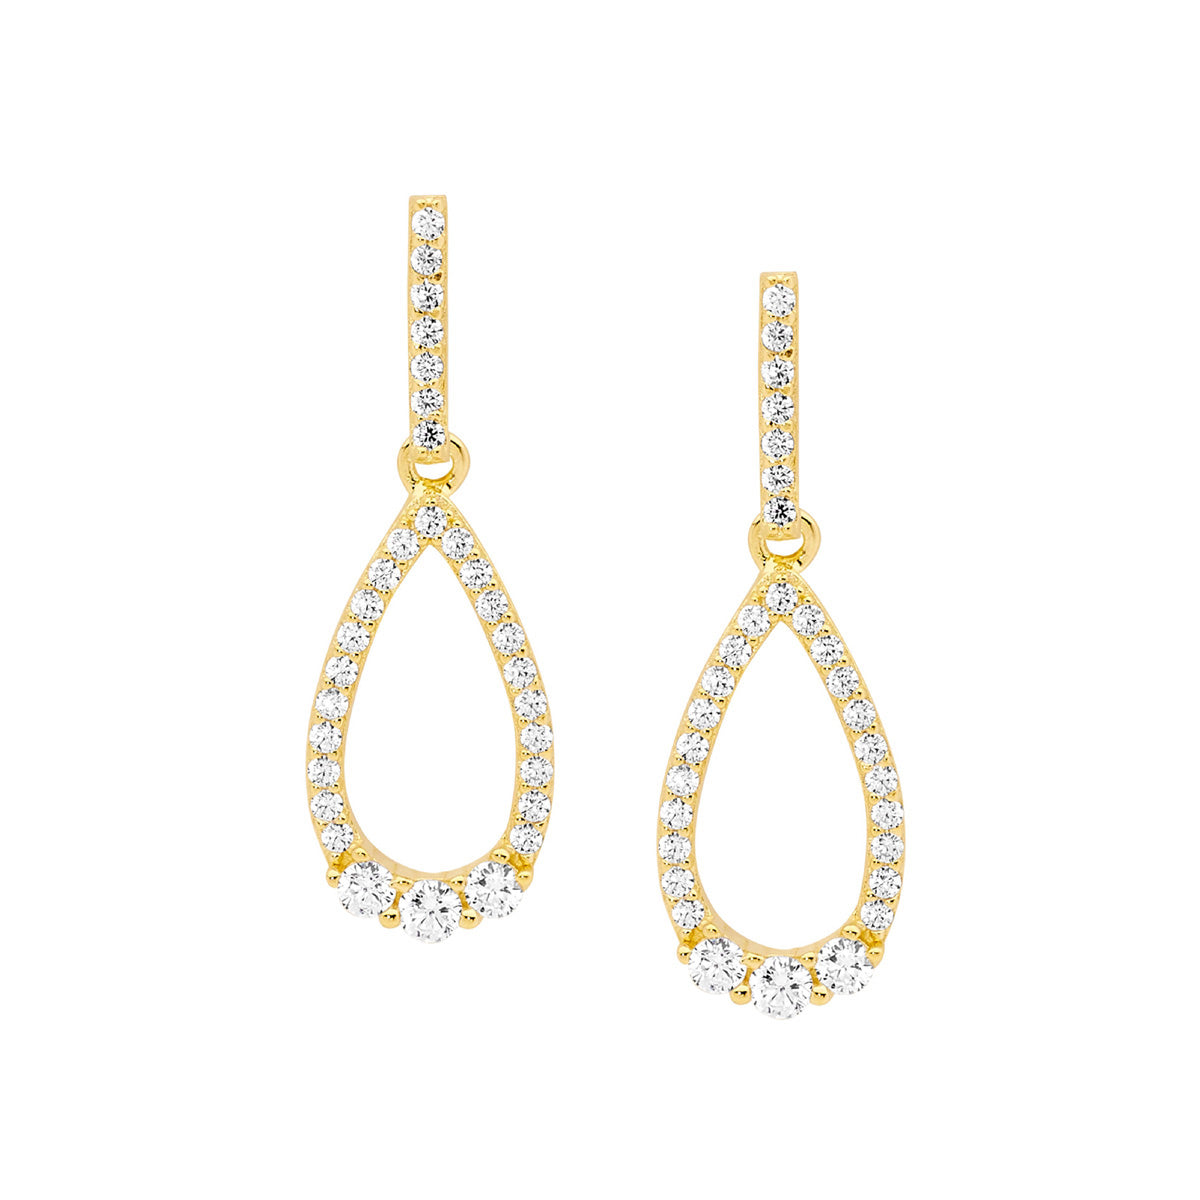 Sterling Silver Cubic Zirconia Open Tear Drop Earrings with Gold Plating